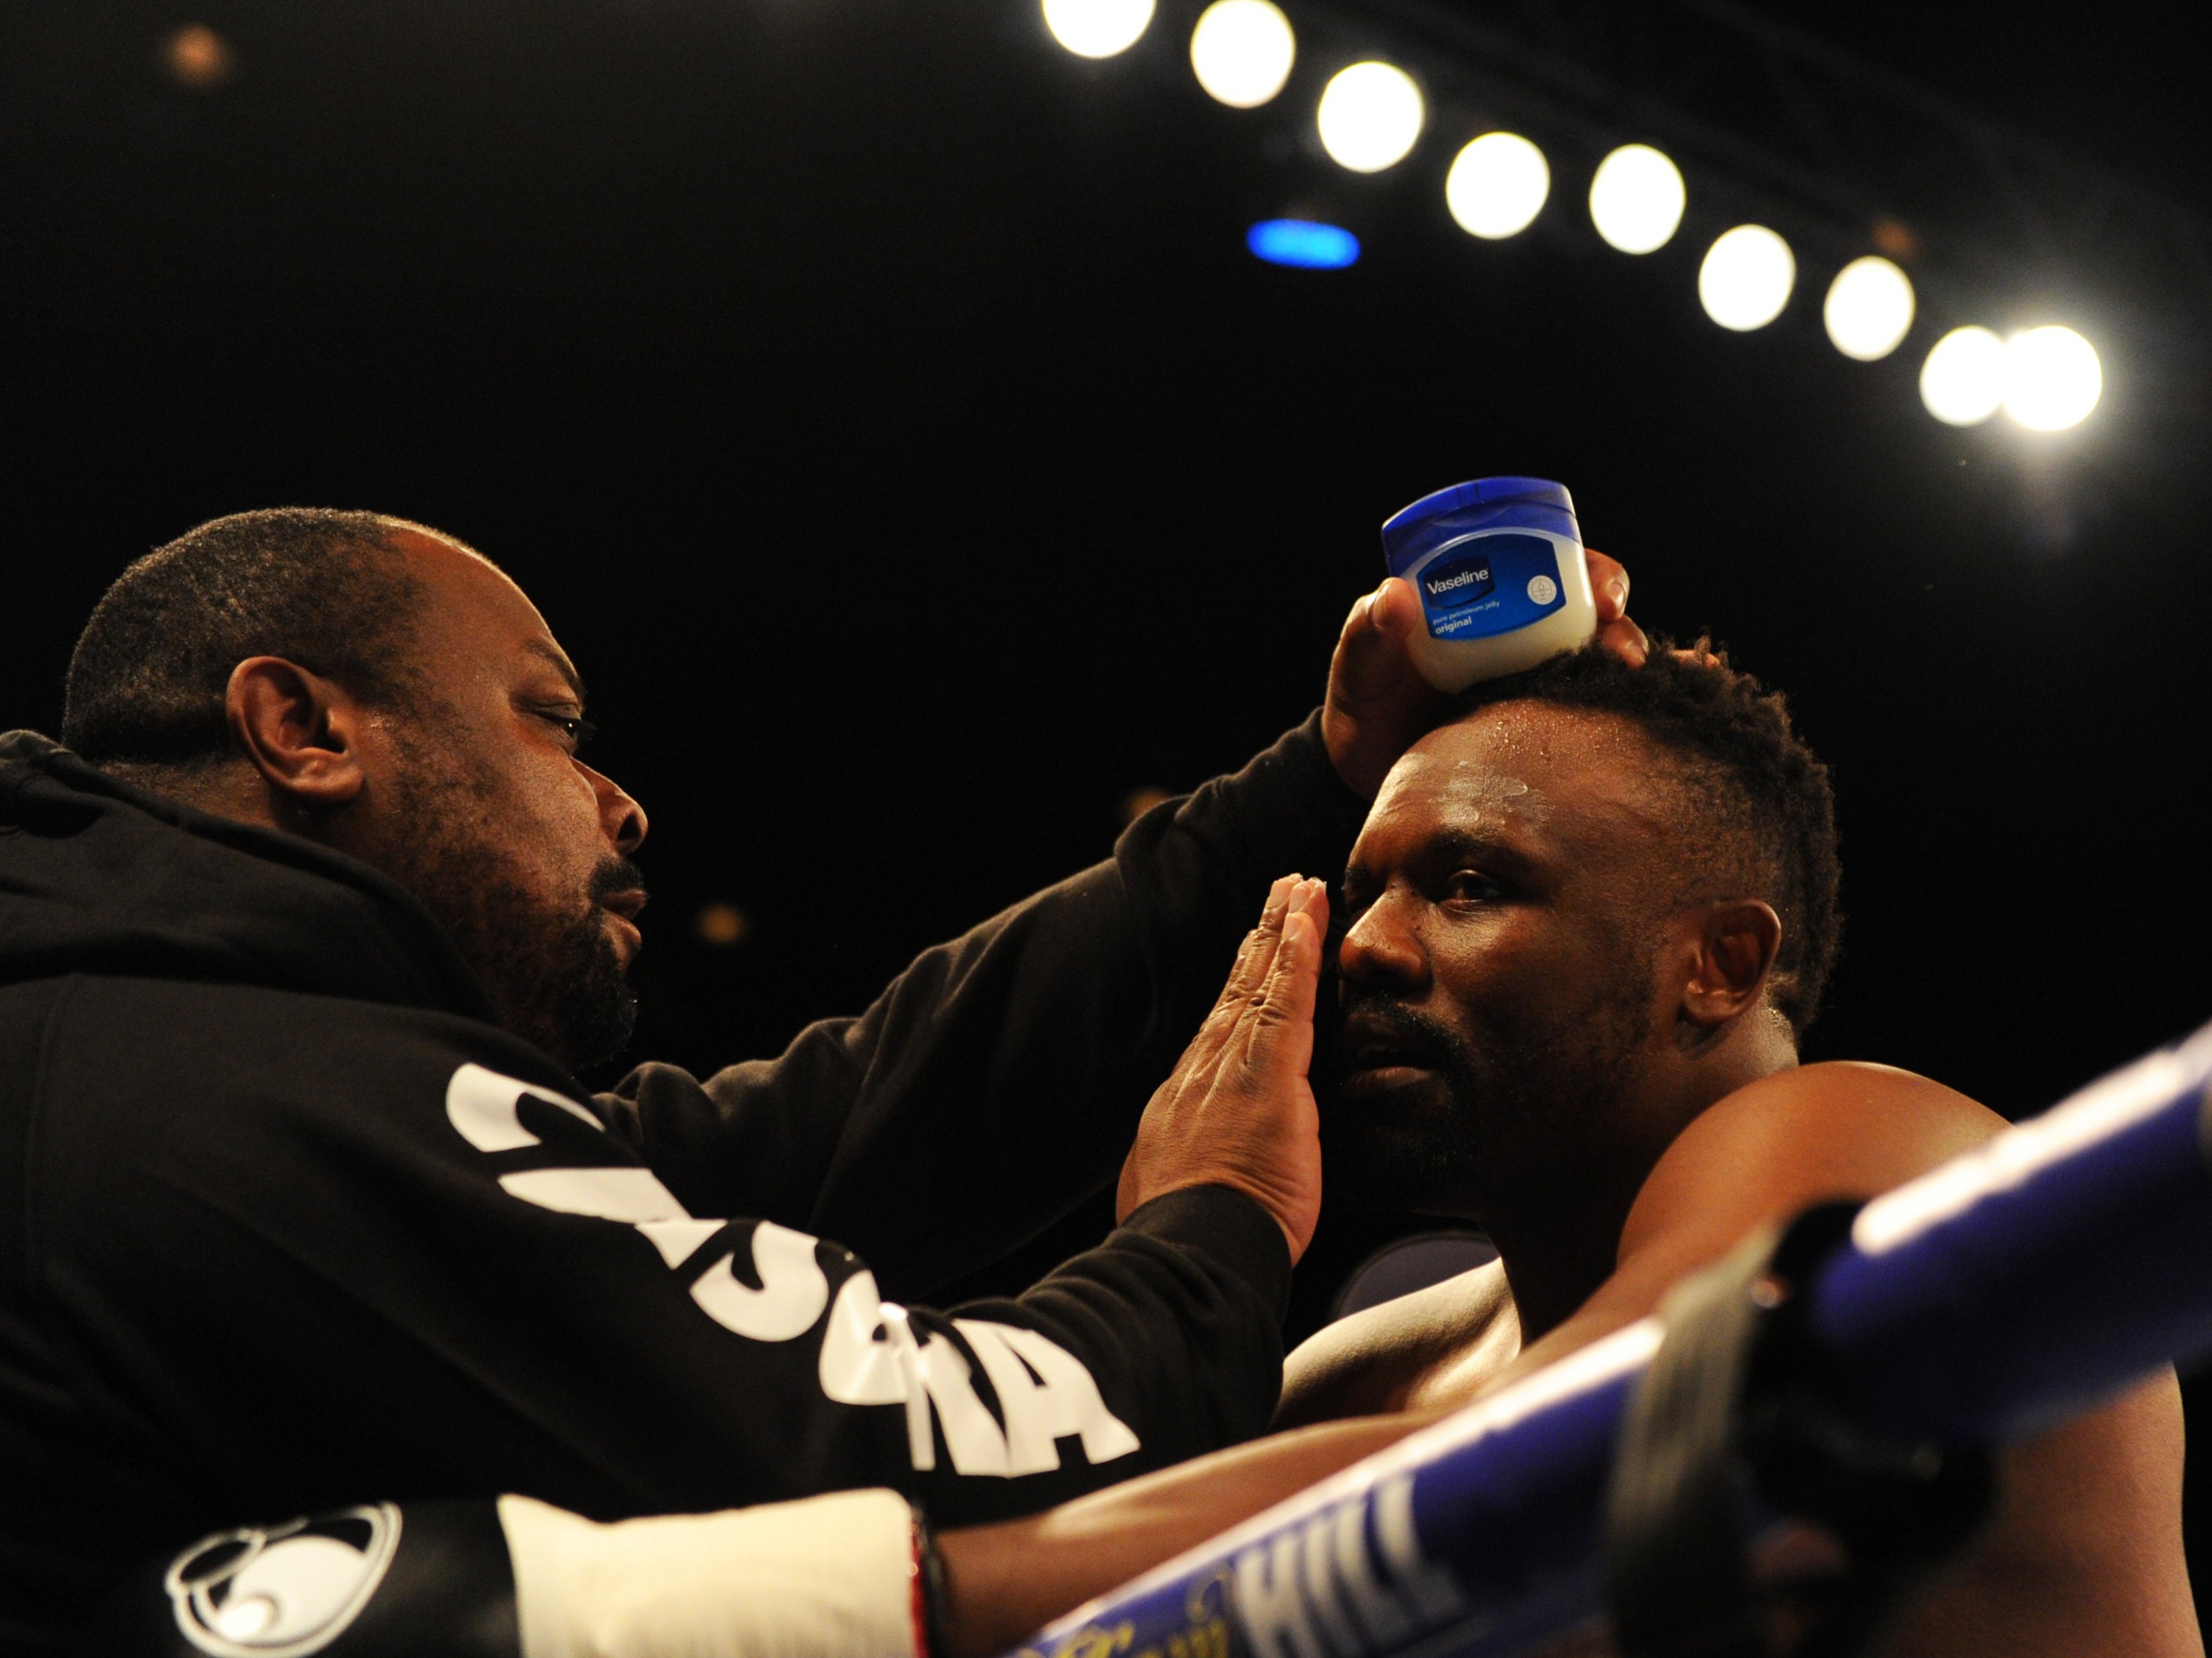 Dereck Chisora takes on Joseph Parker in Manchester this Saturday